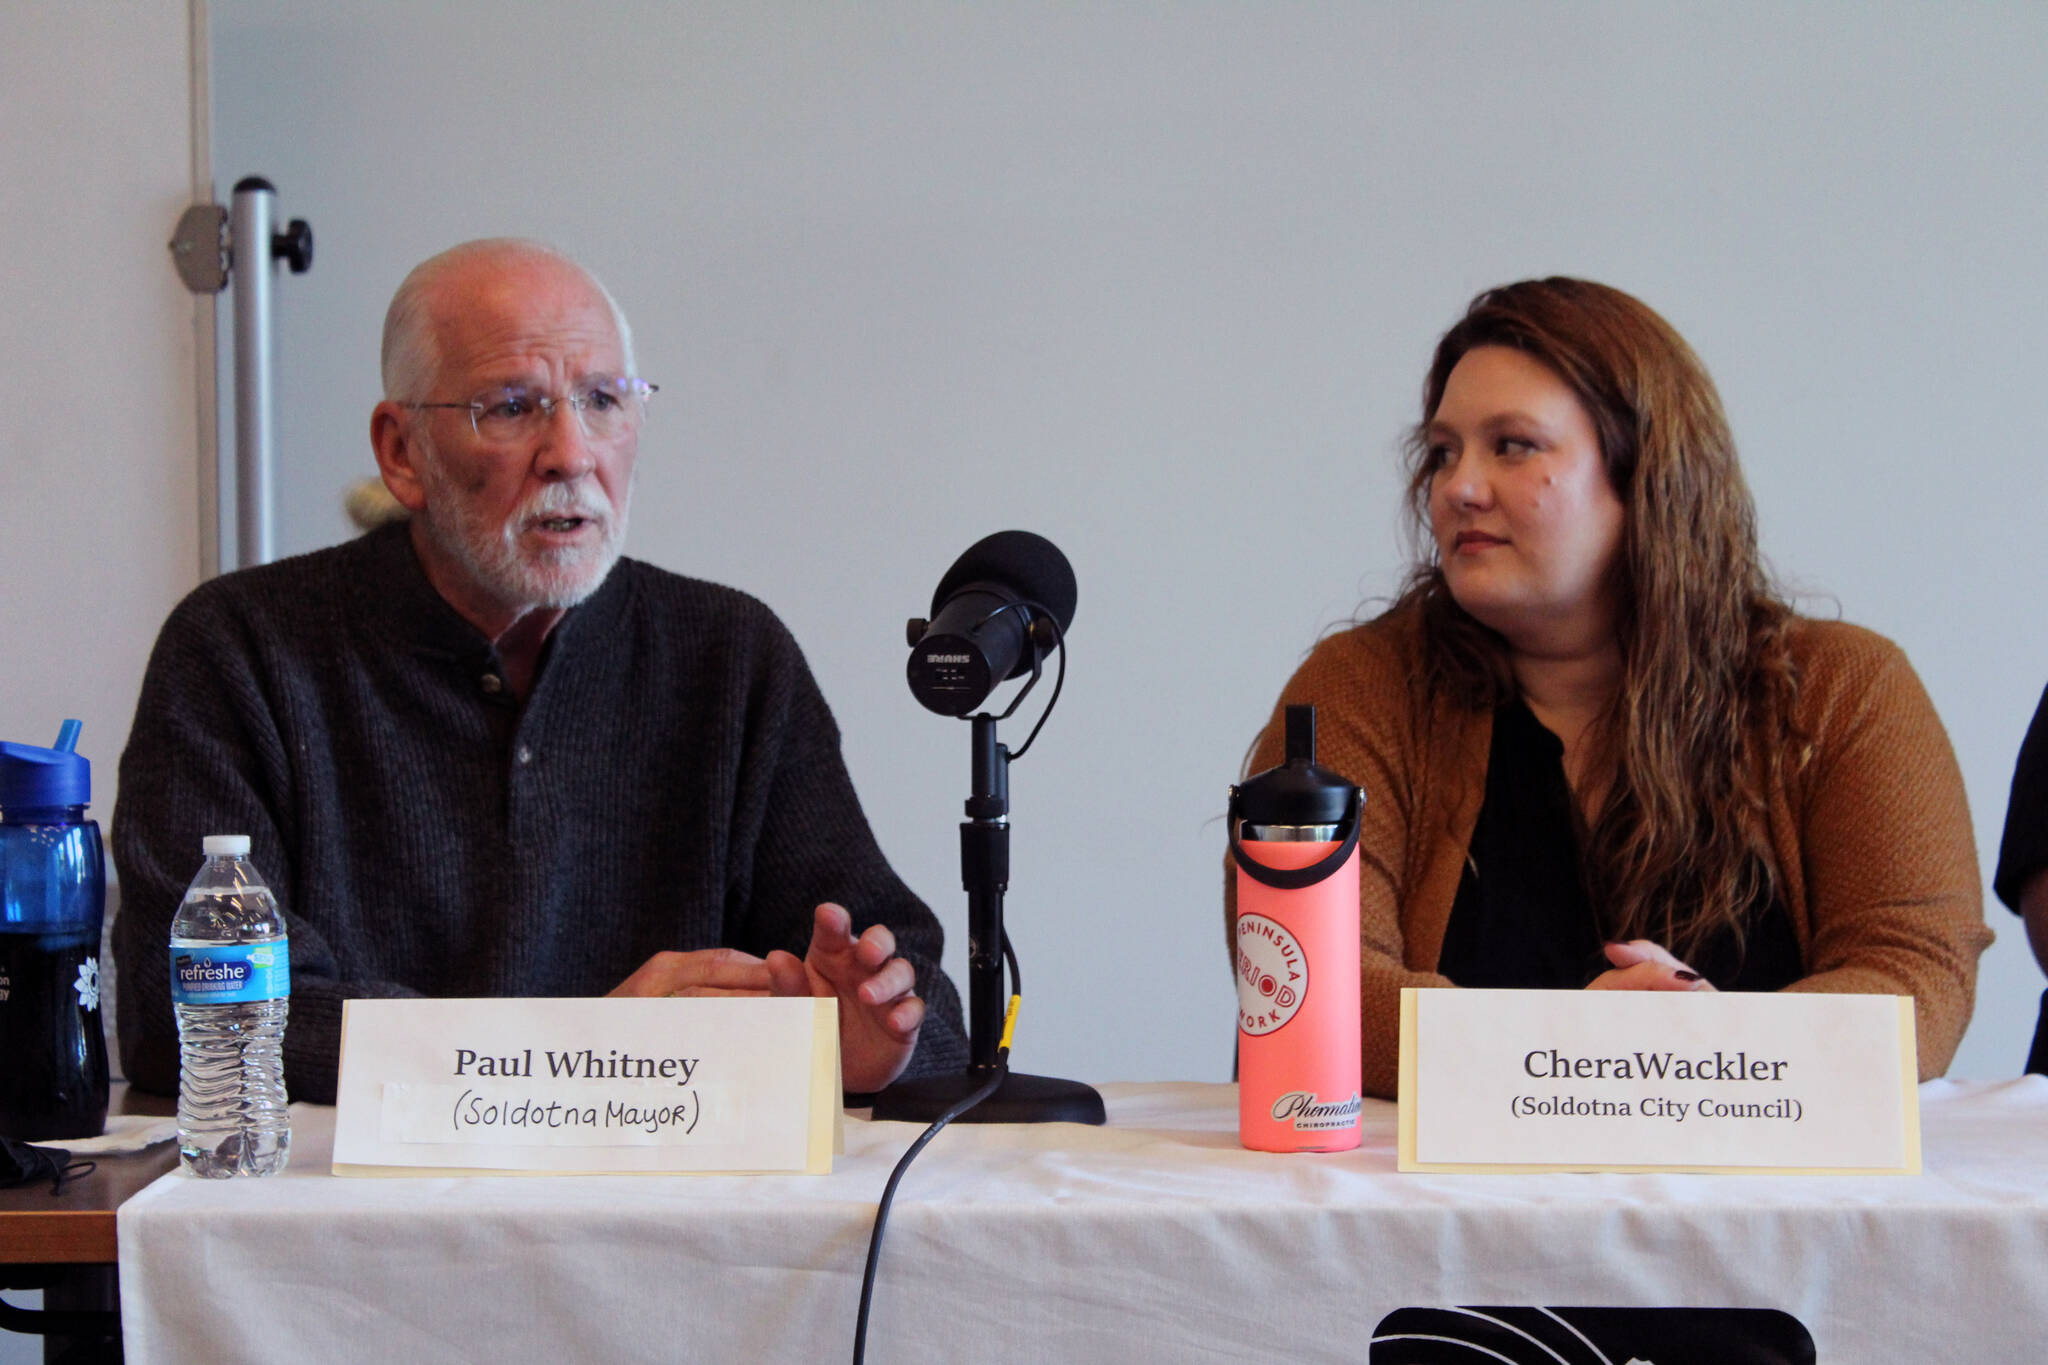 Paul Whitney and Chera Wackler participate in a Soldotna City Council candidate forum at the Soldotna Public Library in Soldotna, Alaska, on Monday, Sept. 4, 2023. (Jake Dye/Peninsula Clarion)